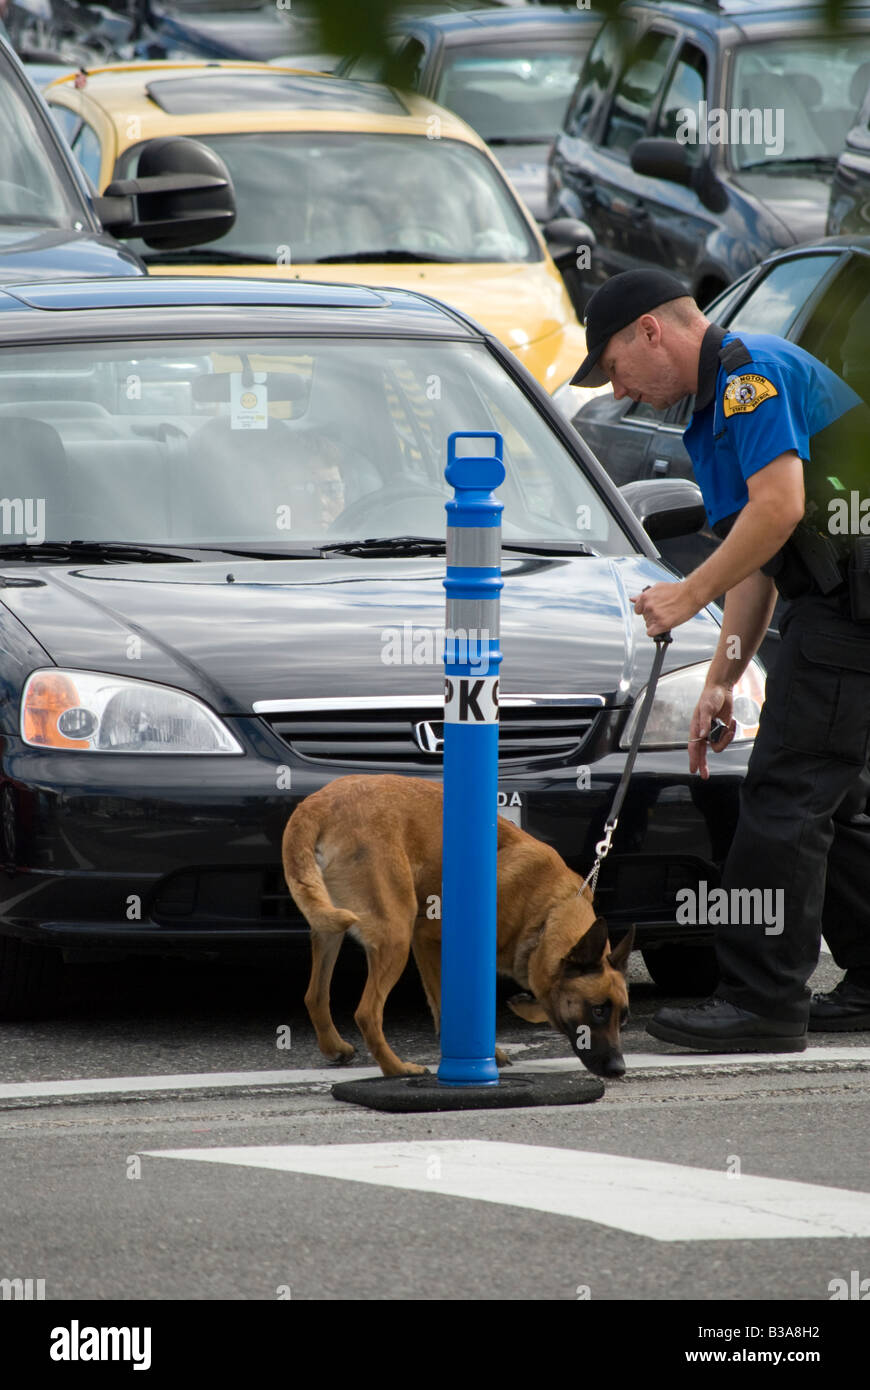 A Washington State Patrol K9 officer inspects vehicles for explosives at the Mukilteo-Clinton ferry run in Mukilteo, Washington. Stock Photo